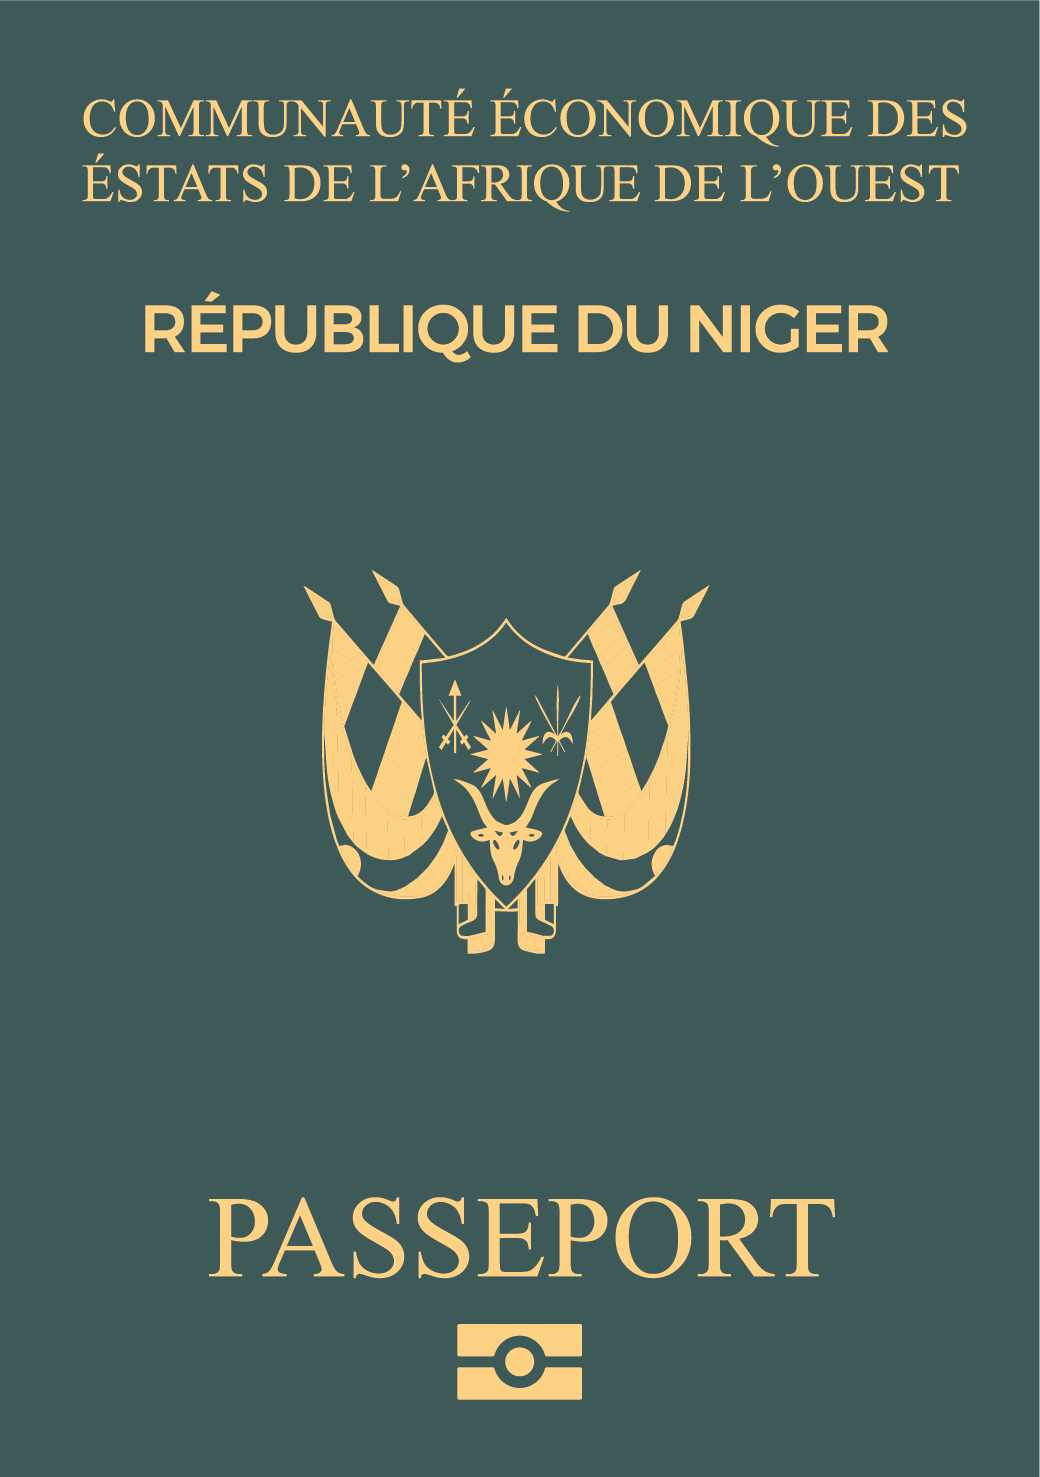 Niger: Over 350 diplomatic passports of officials of deposed Bazoum’s regime cancelled